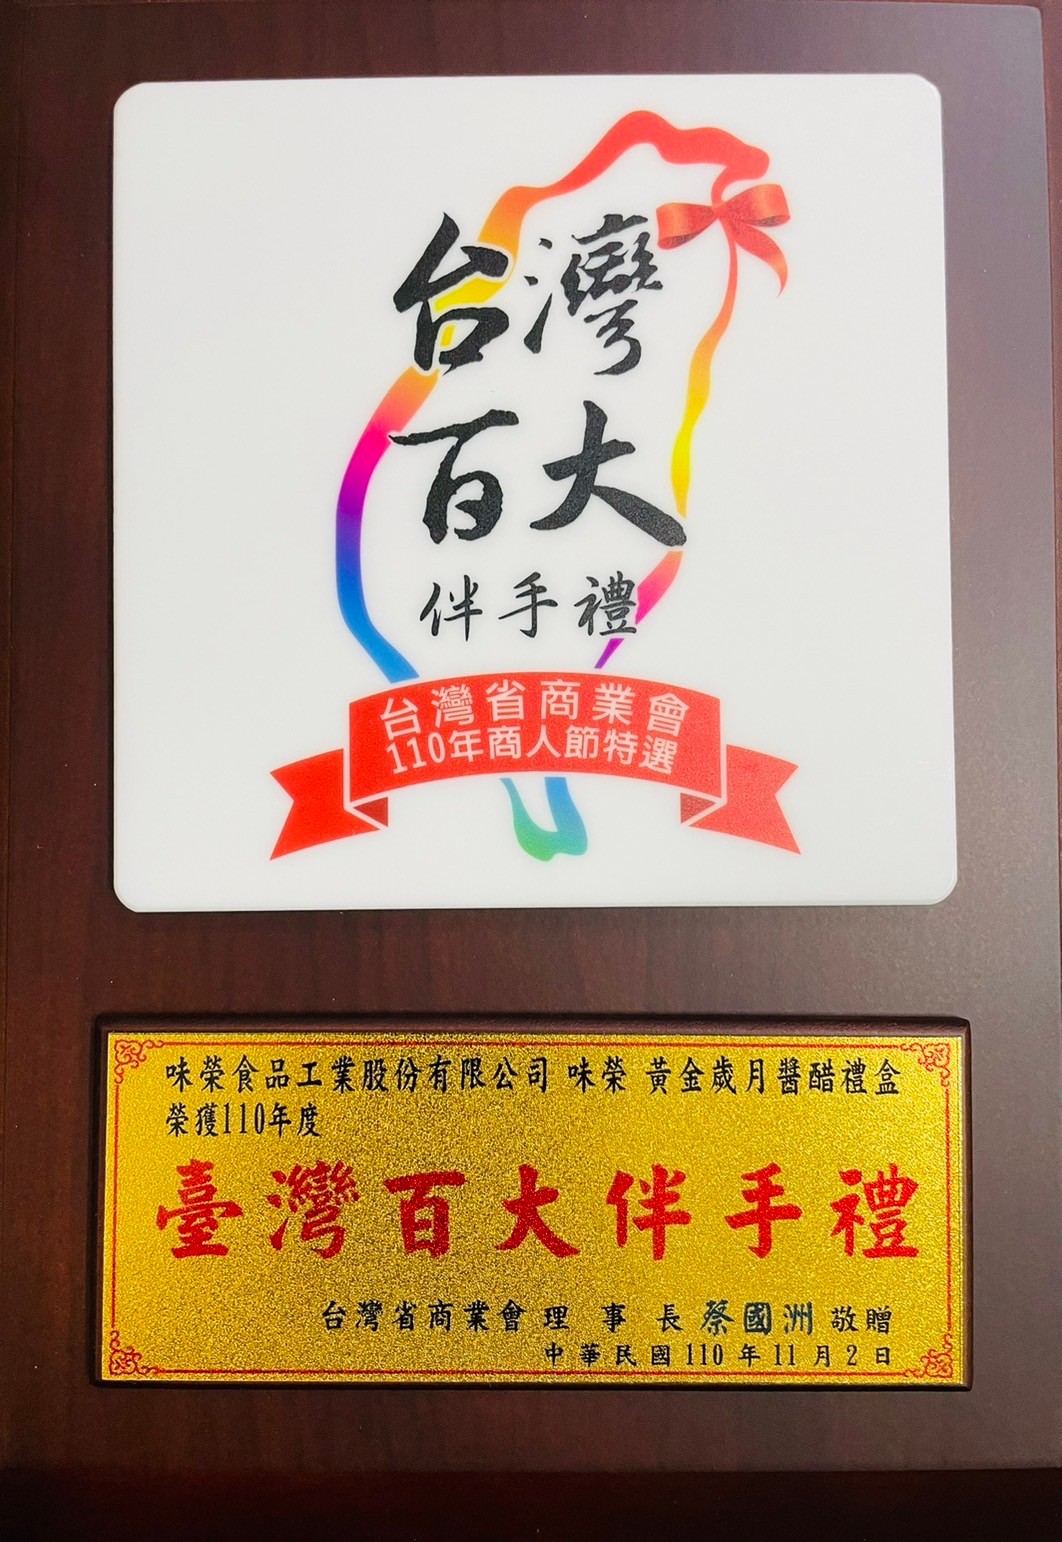 [Weirong Golden Years Sauce and Vinegar Gift Box] Won the "Top 100 Souvenirs" specially selected by the Taiwan Provincial Chamber of Commerce in the 110th year of commerce.